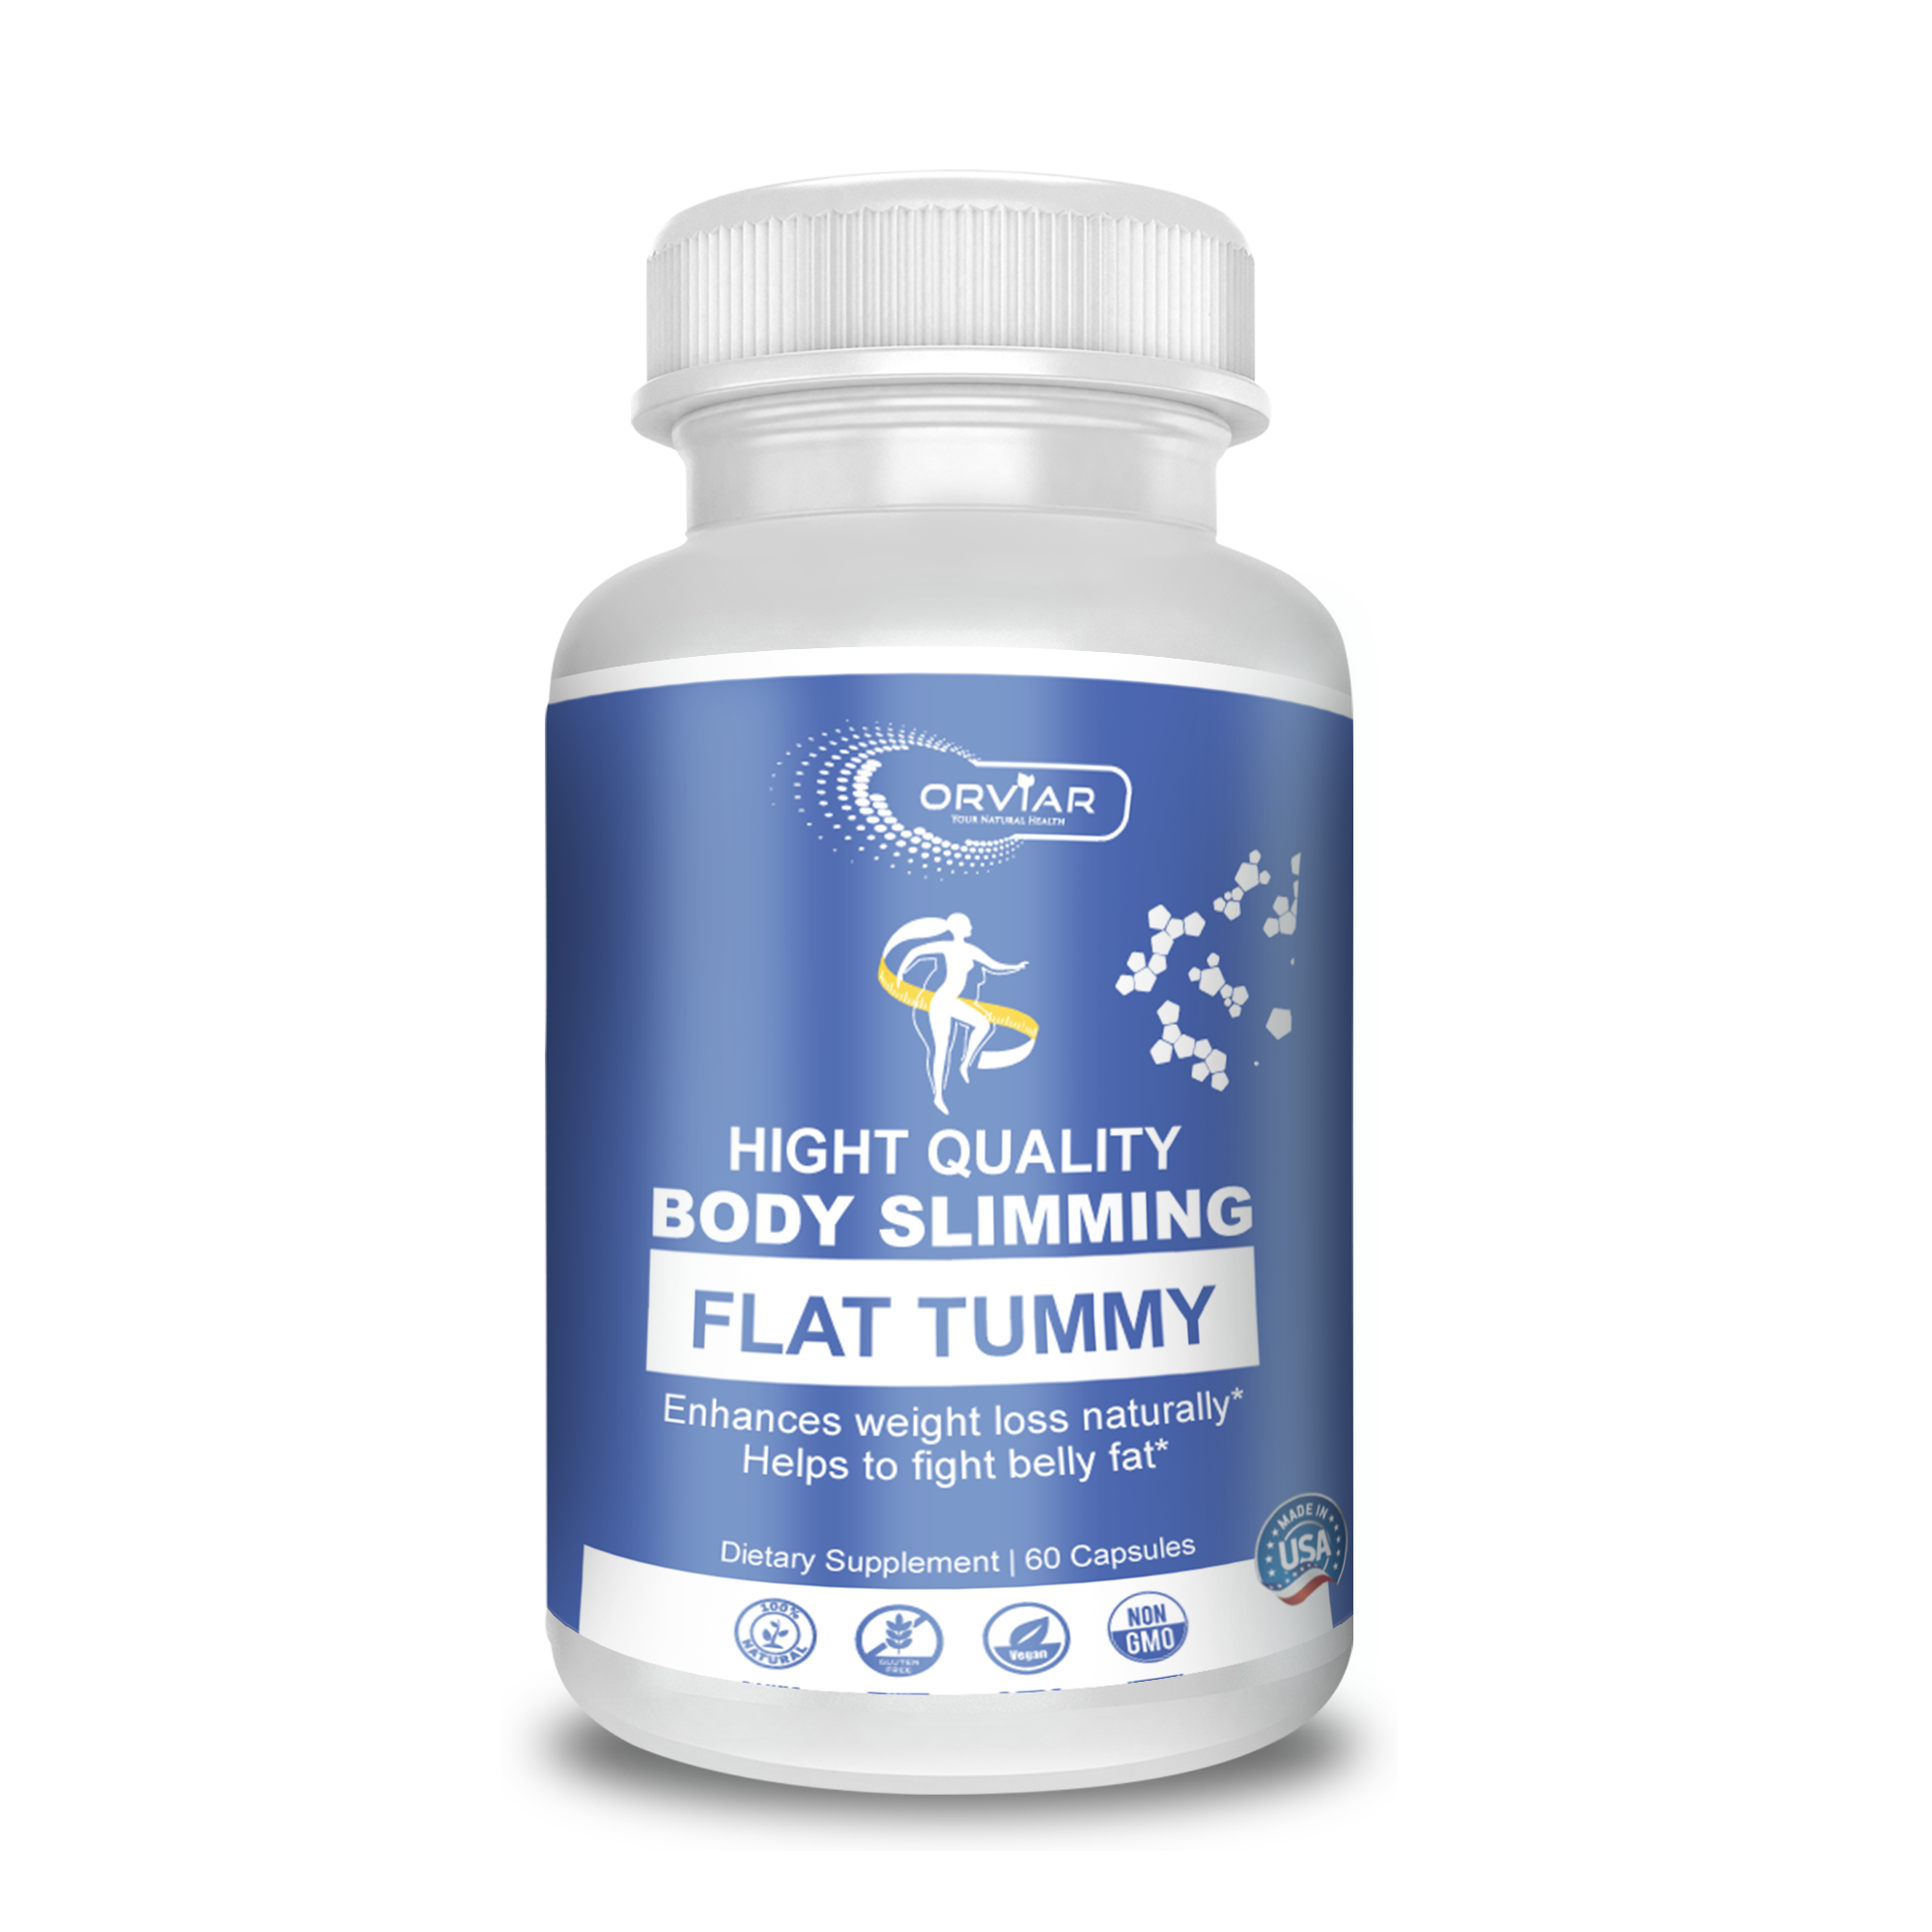 Orviar Flat Tummy - Body Slimming - Helps to fight belly fat – ShanShar  Beauty : The world of beauty.